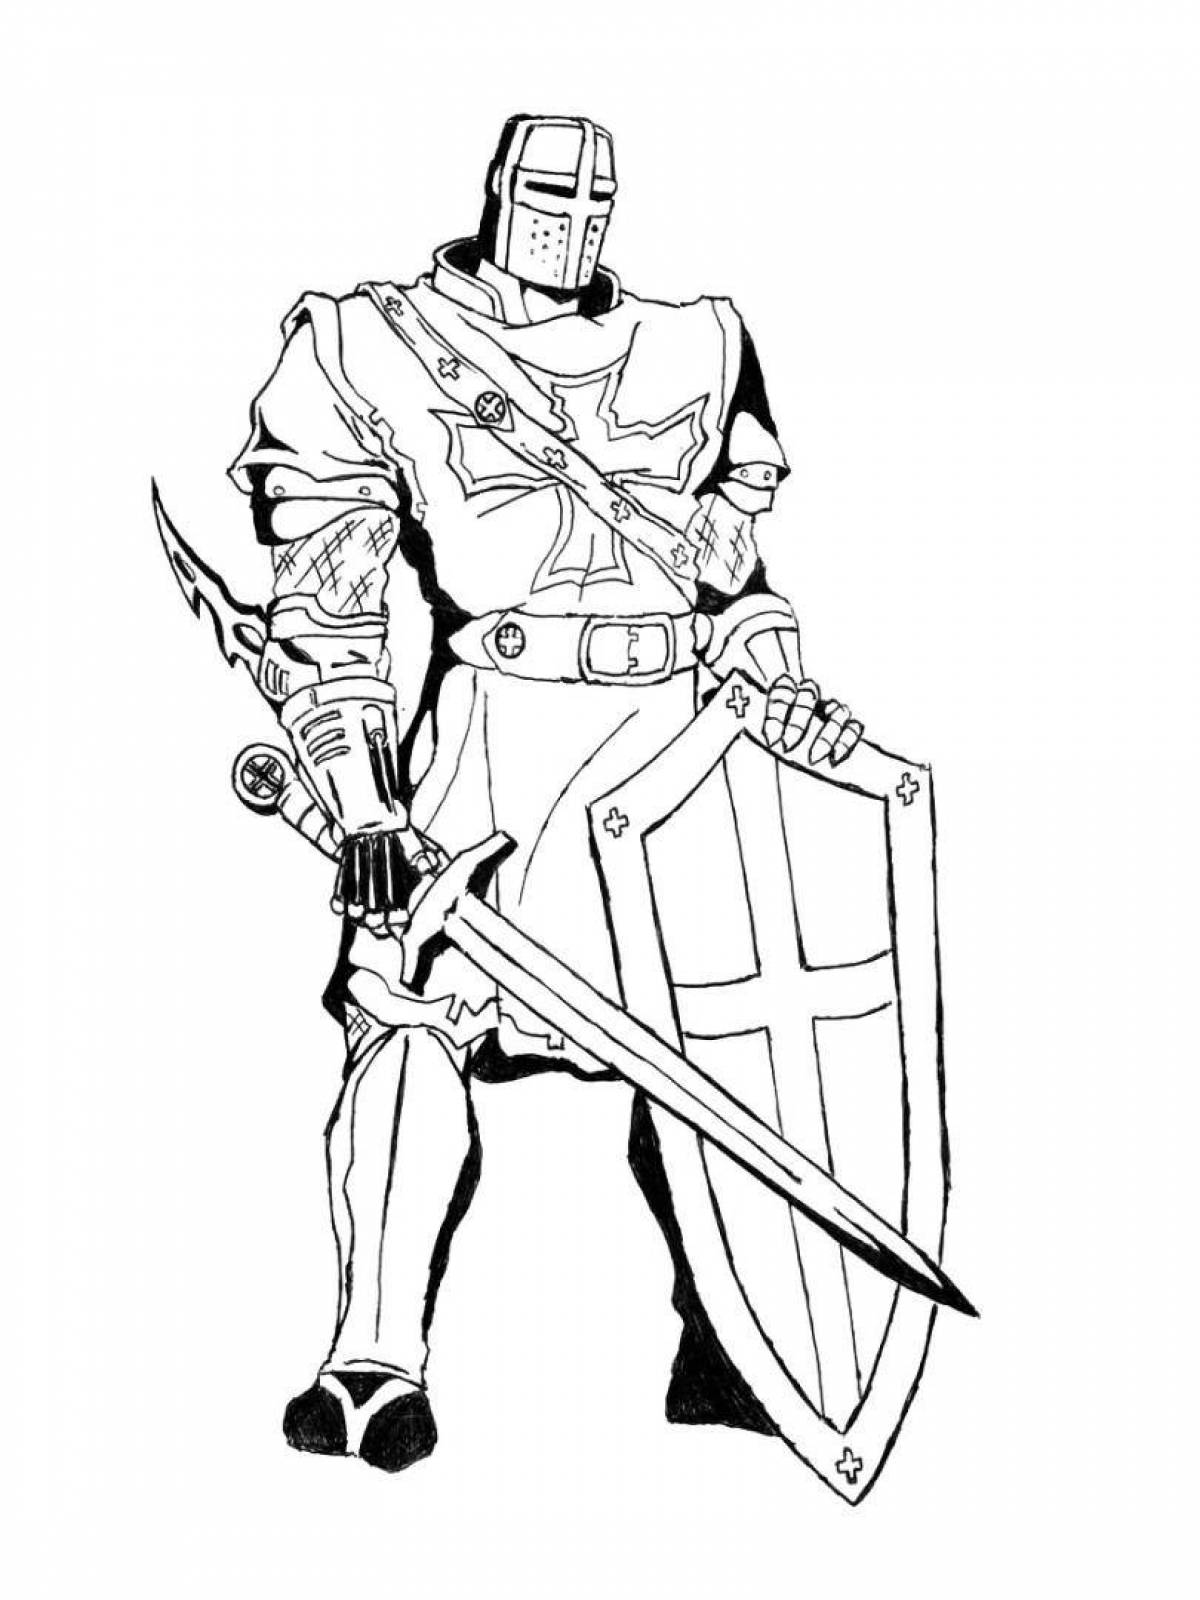 Dazzling knight coloring book